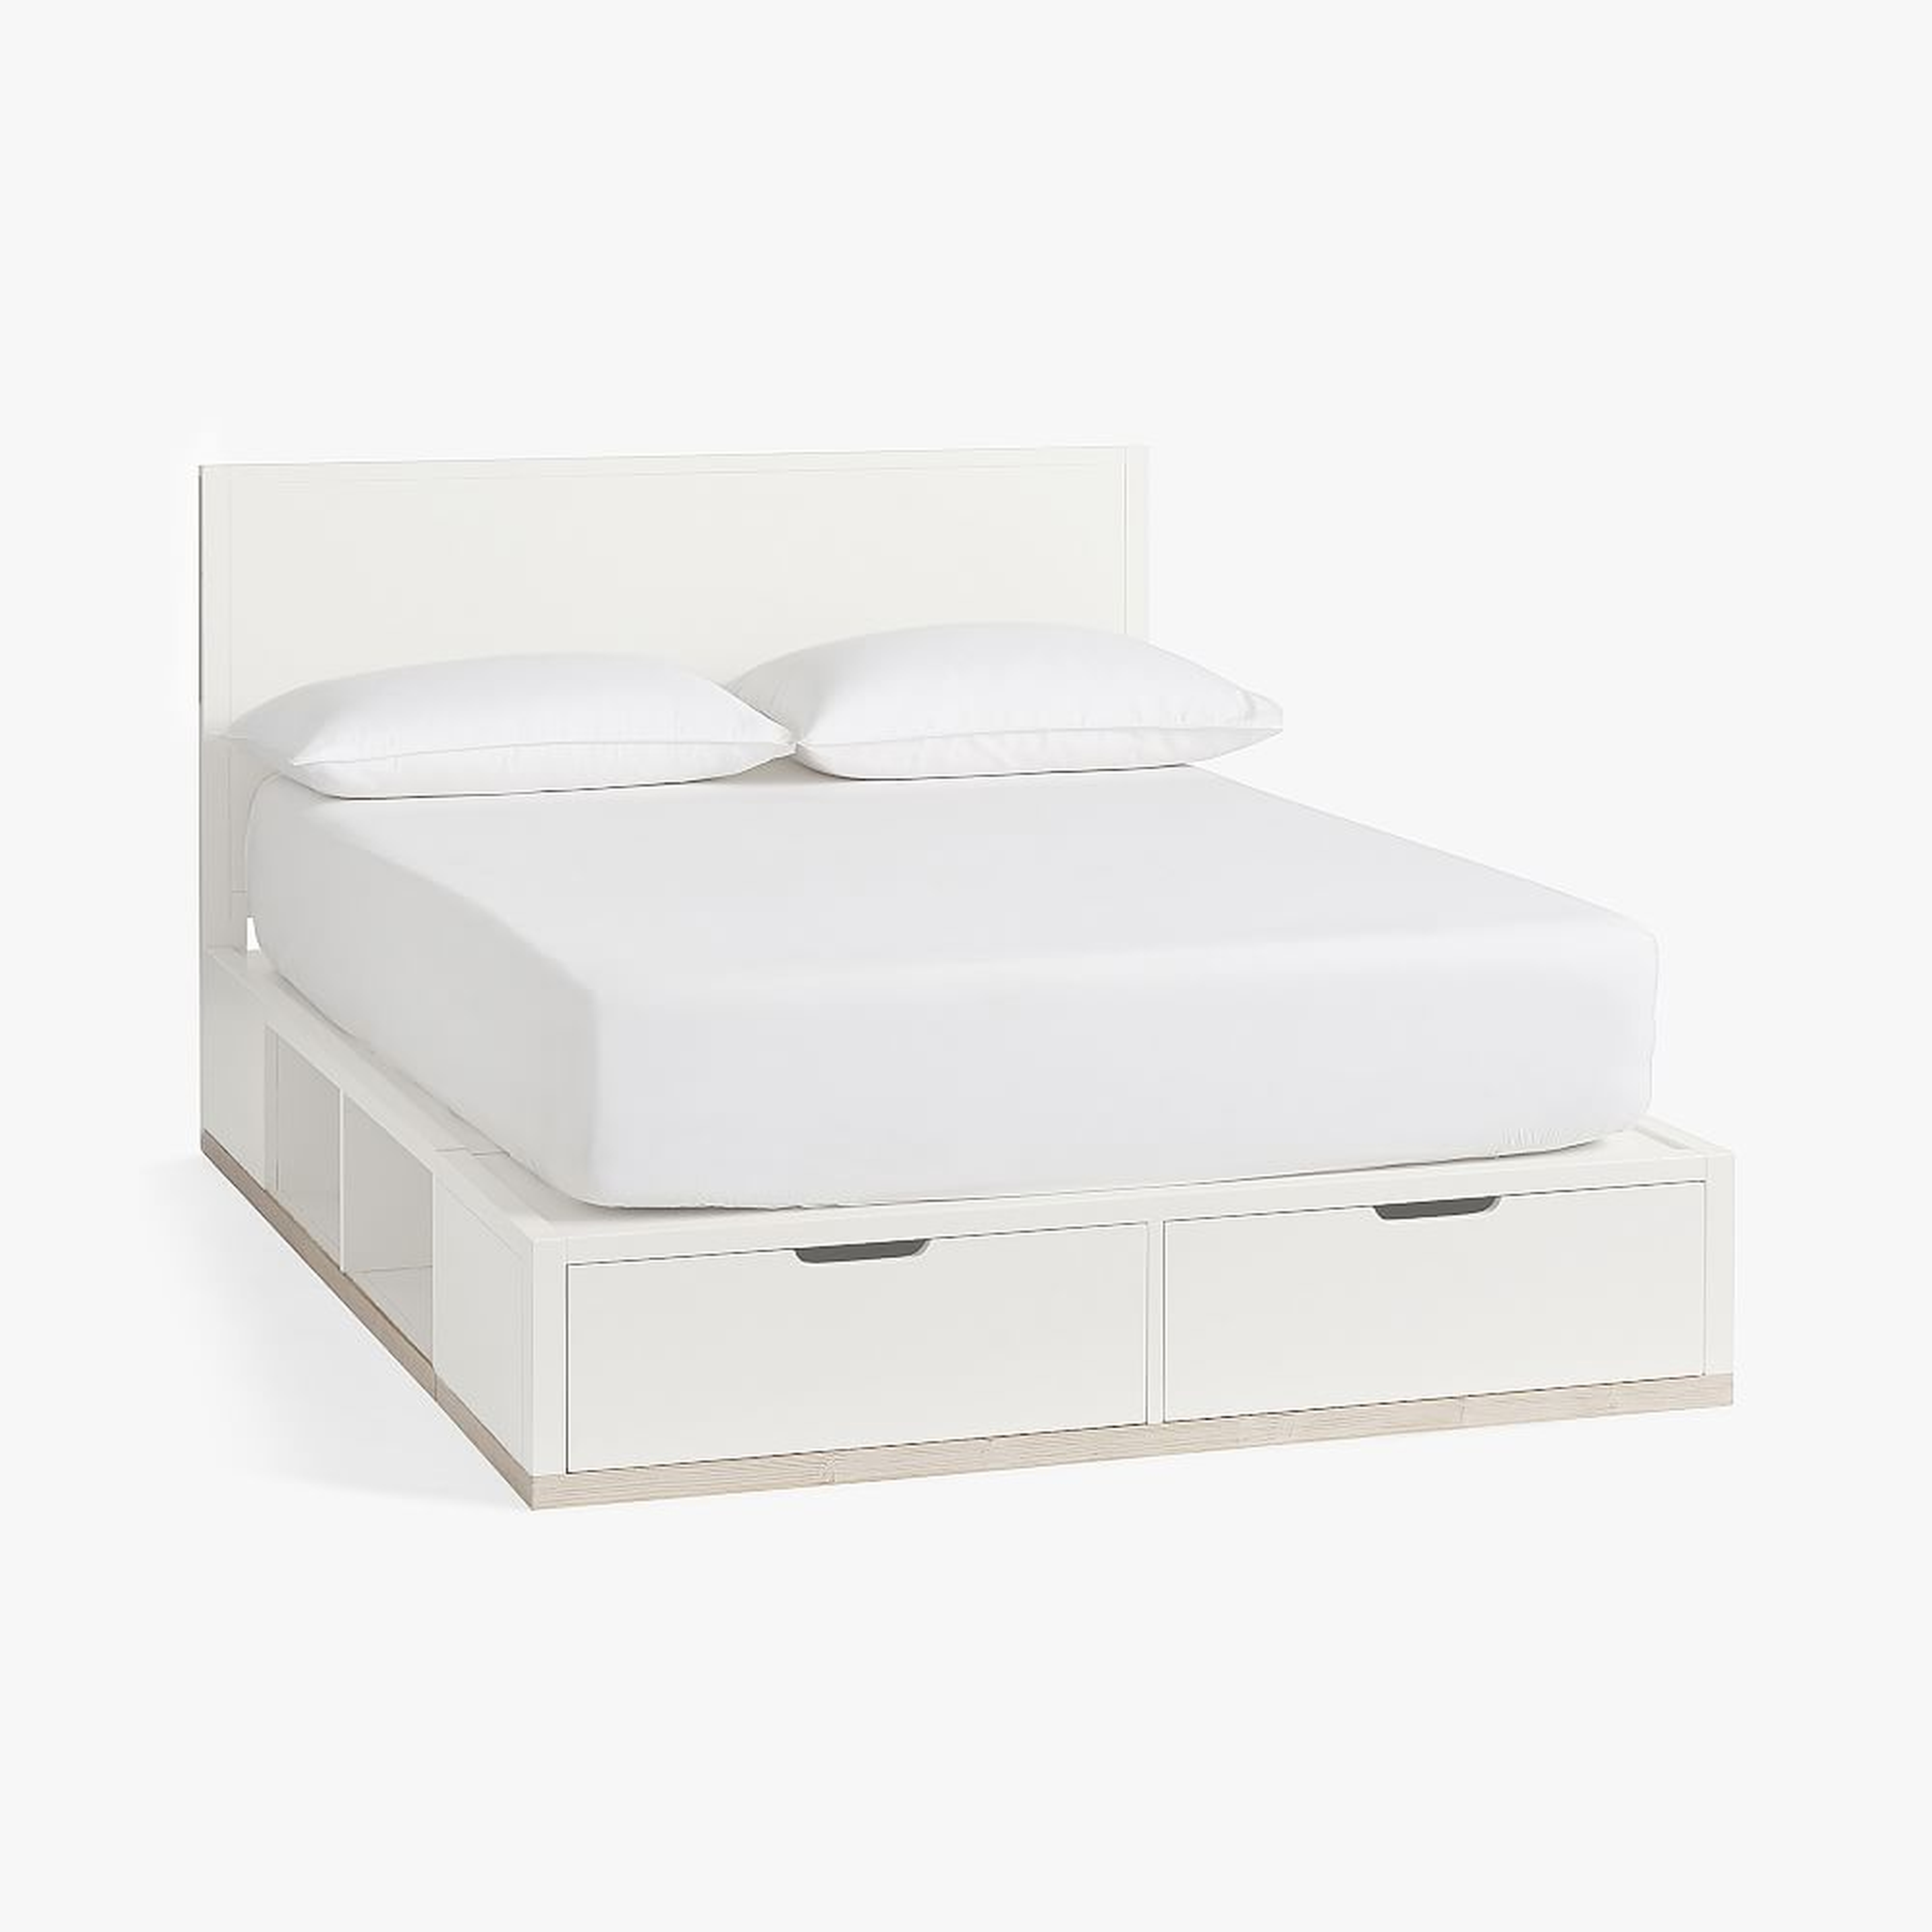 Rhys Storage Bed, Full, Weathered White/Simply White - Pottery Barn Teen